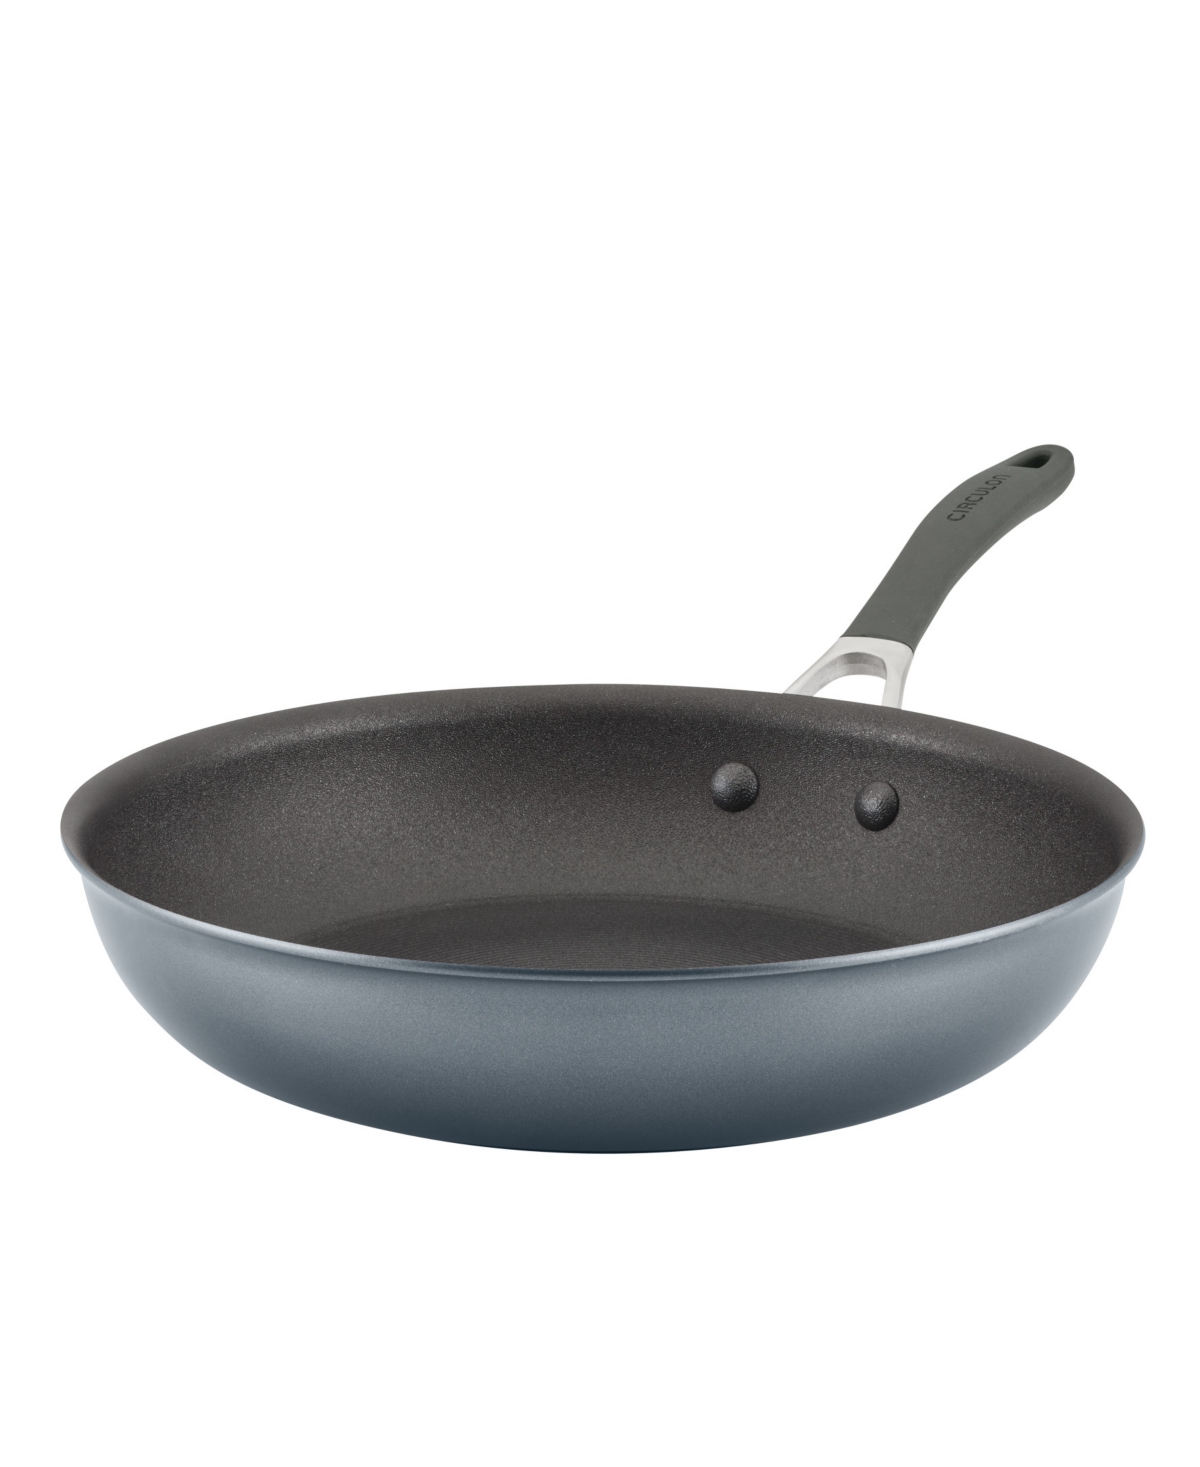 Circulon A1 Series With Scratchdefense Technology Aluminum 12" Nonstick Induction Frying Pan In Graphite